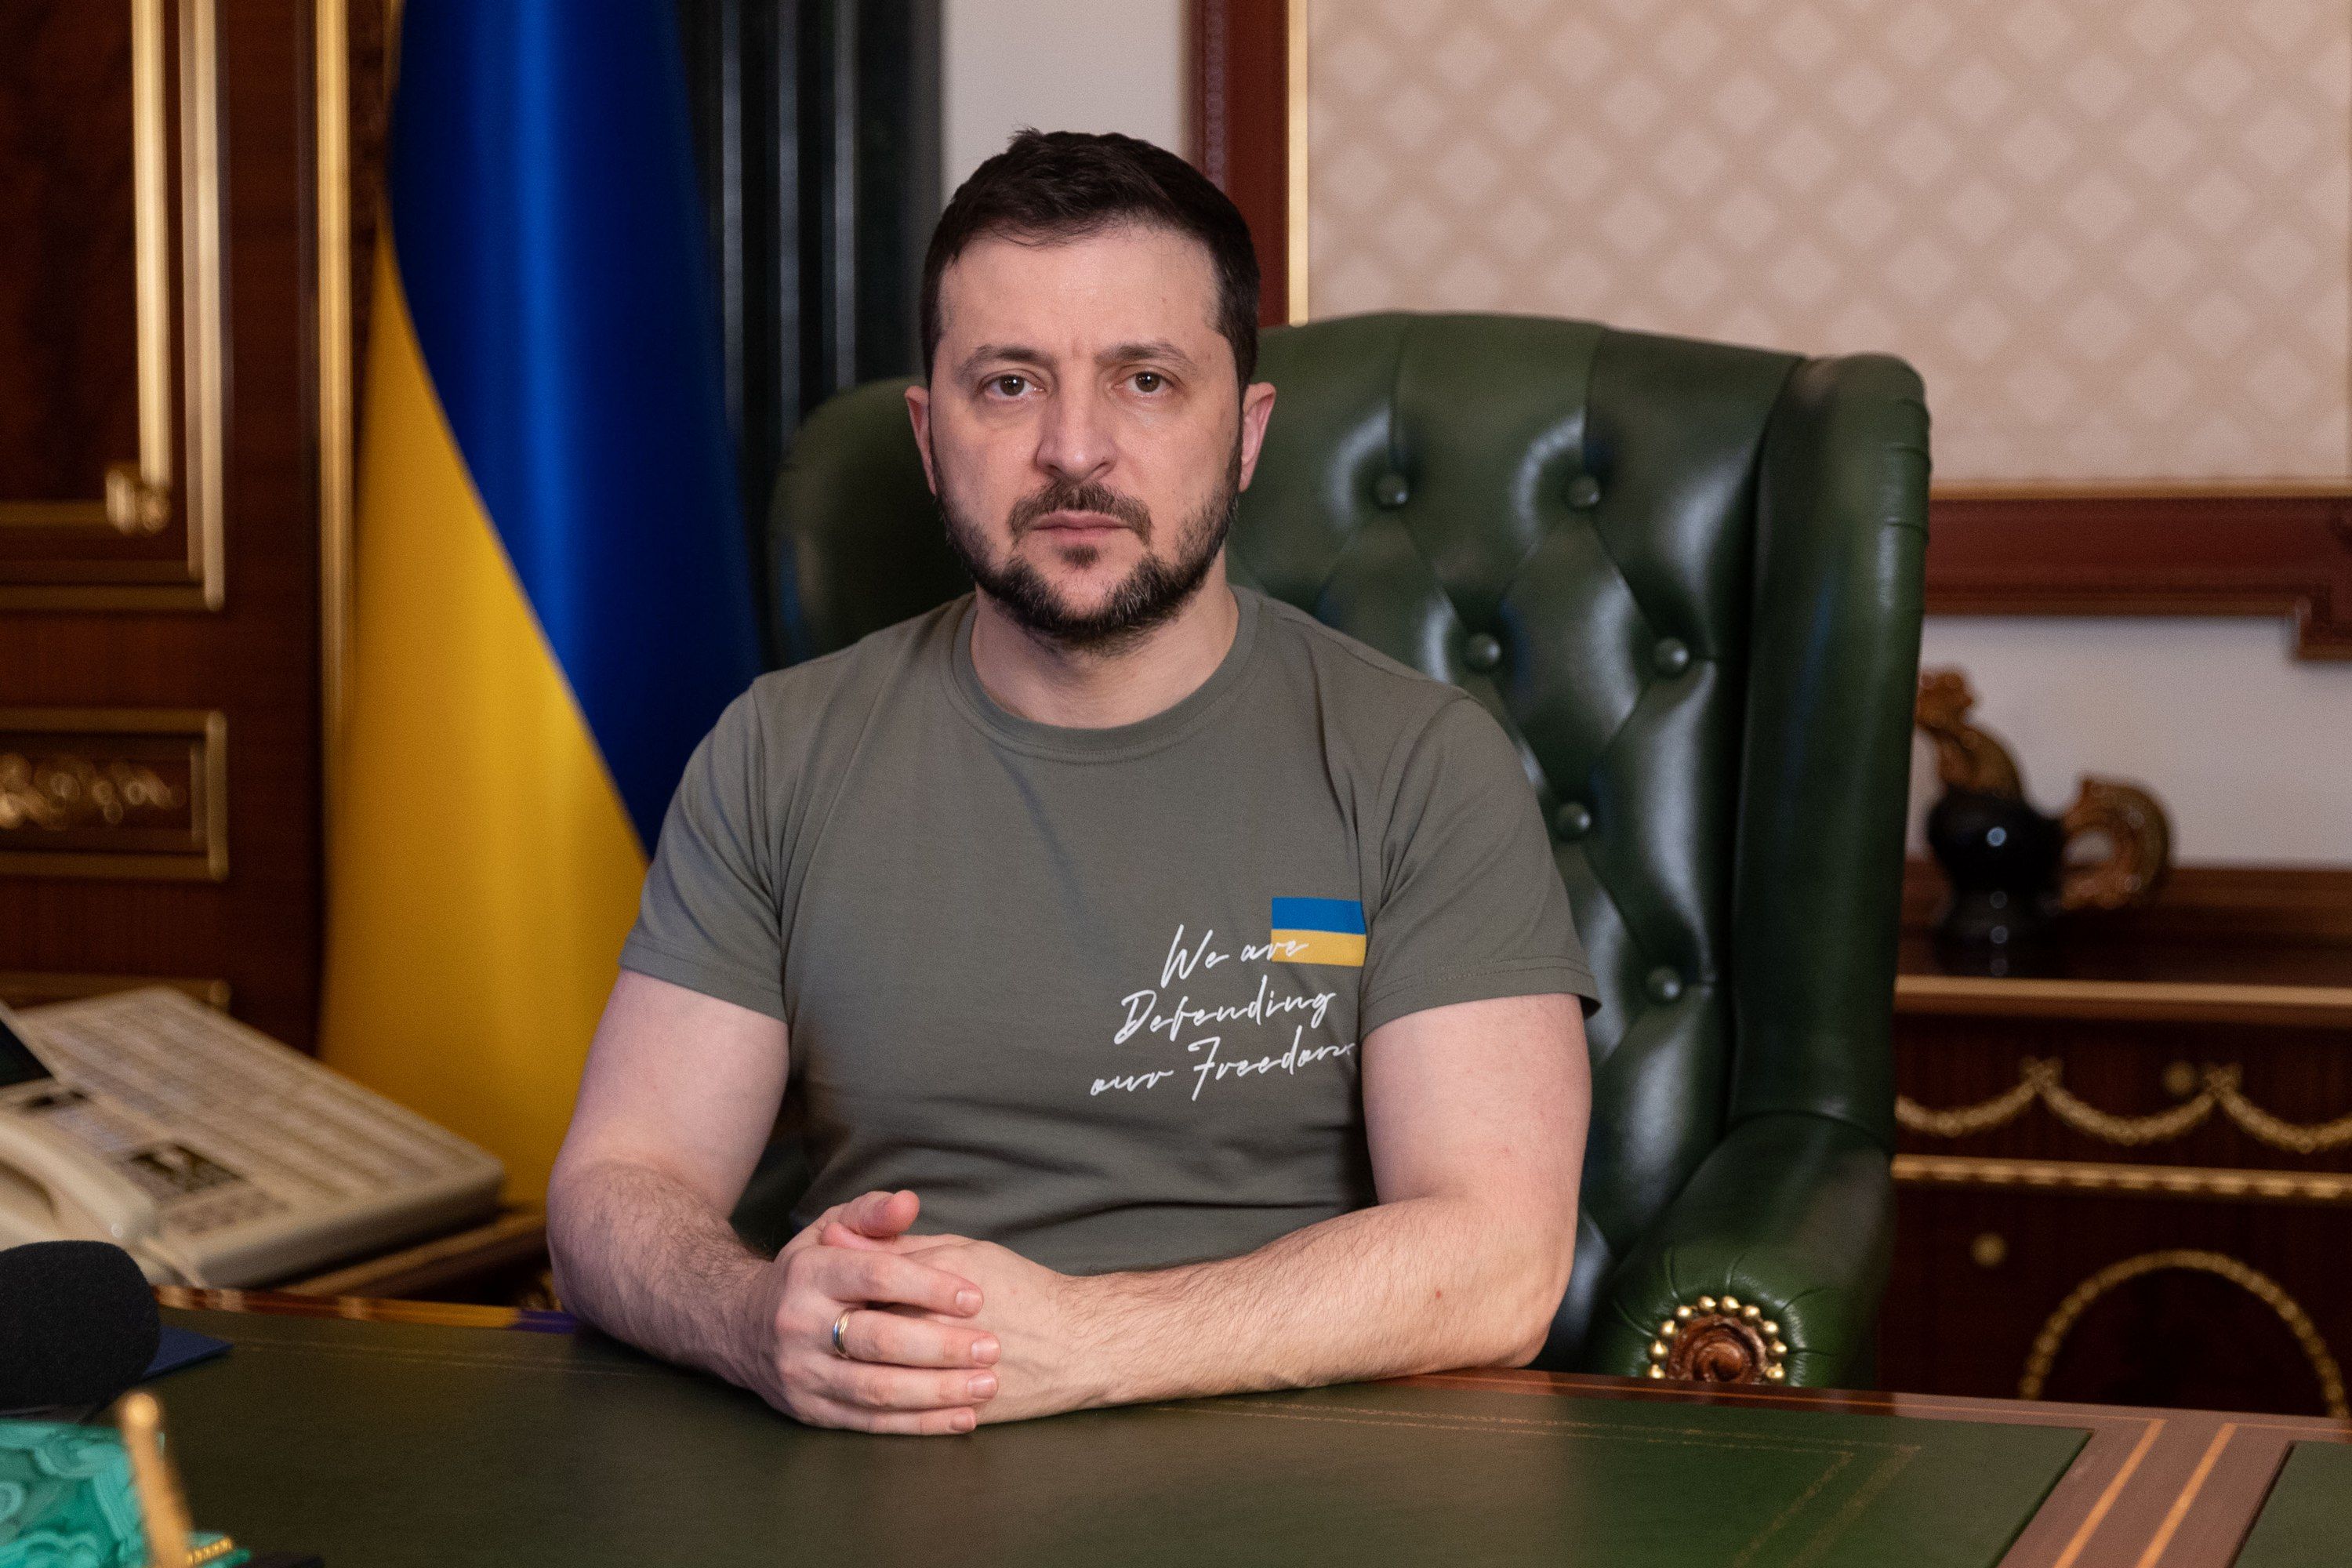 The supply of weapons to Ukraine is the best investment in maintaining stability in the world - President Volodymyr Zelenskyy